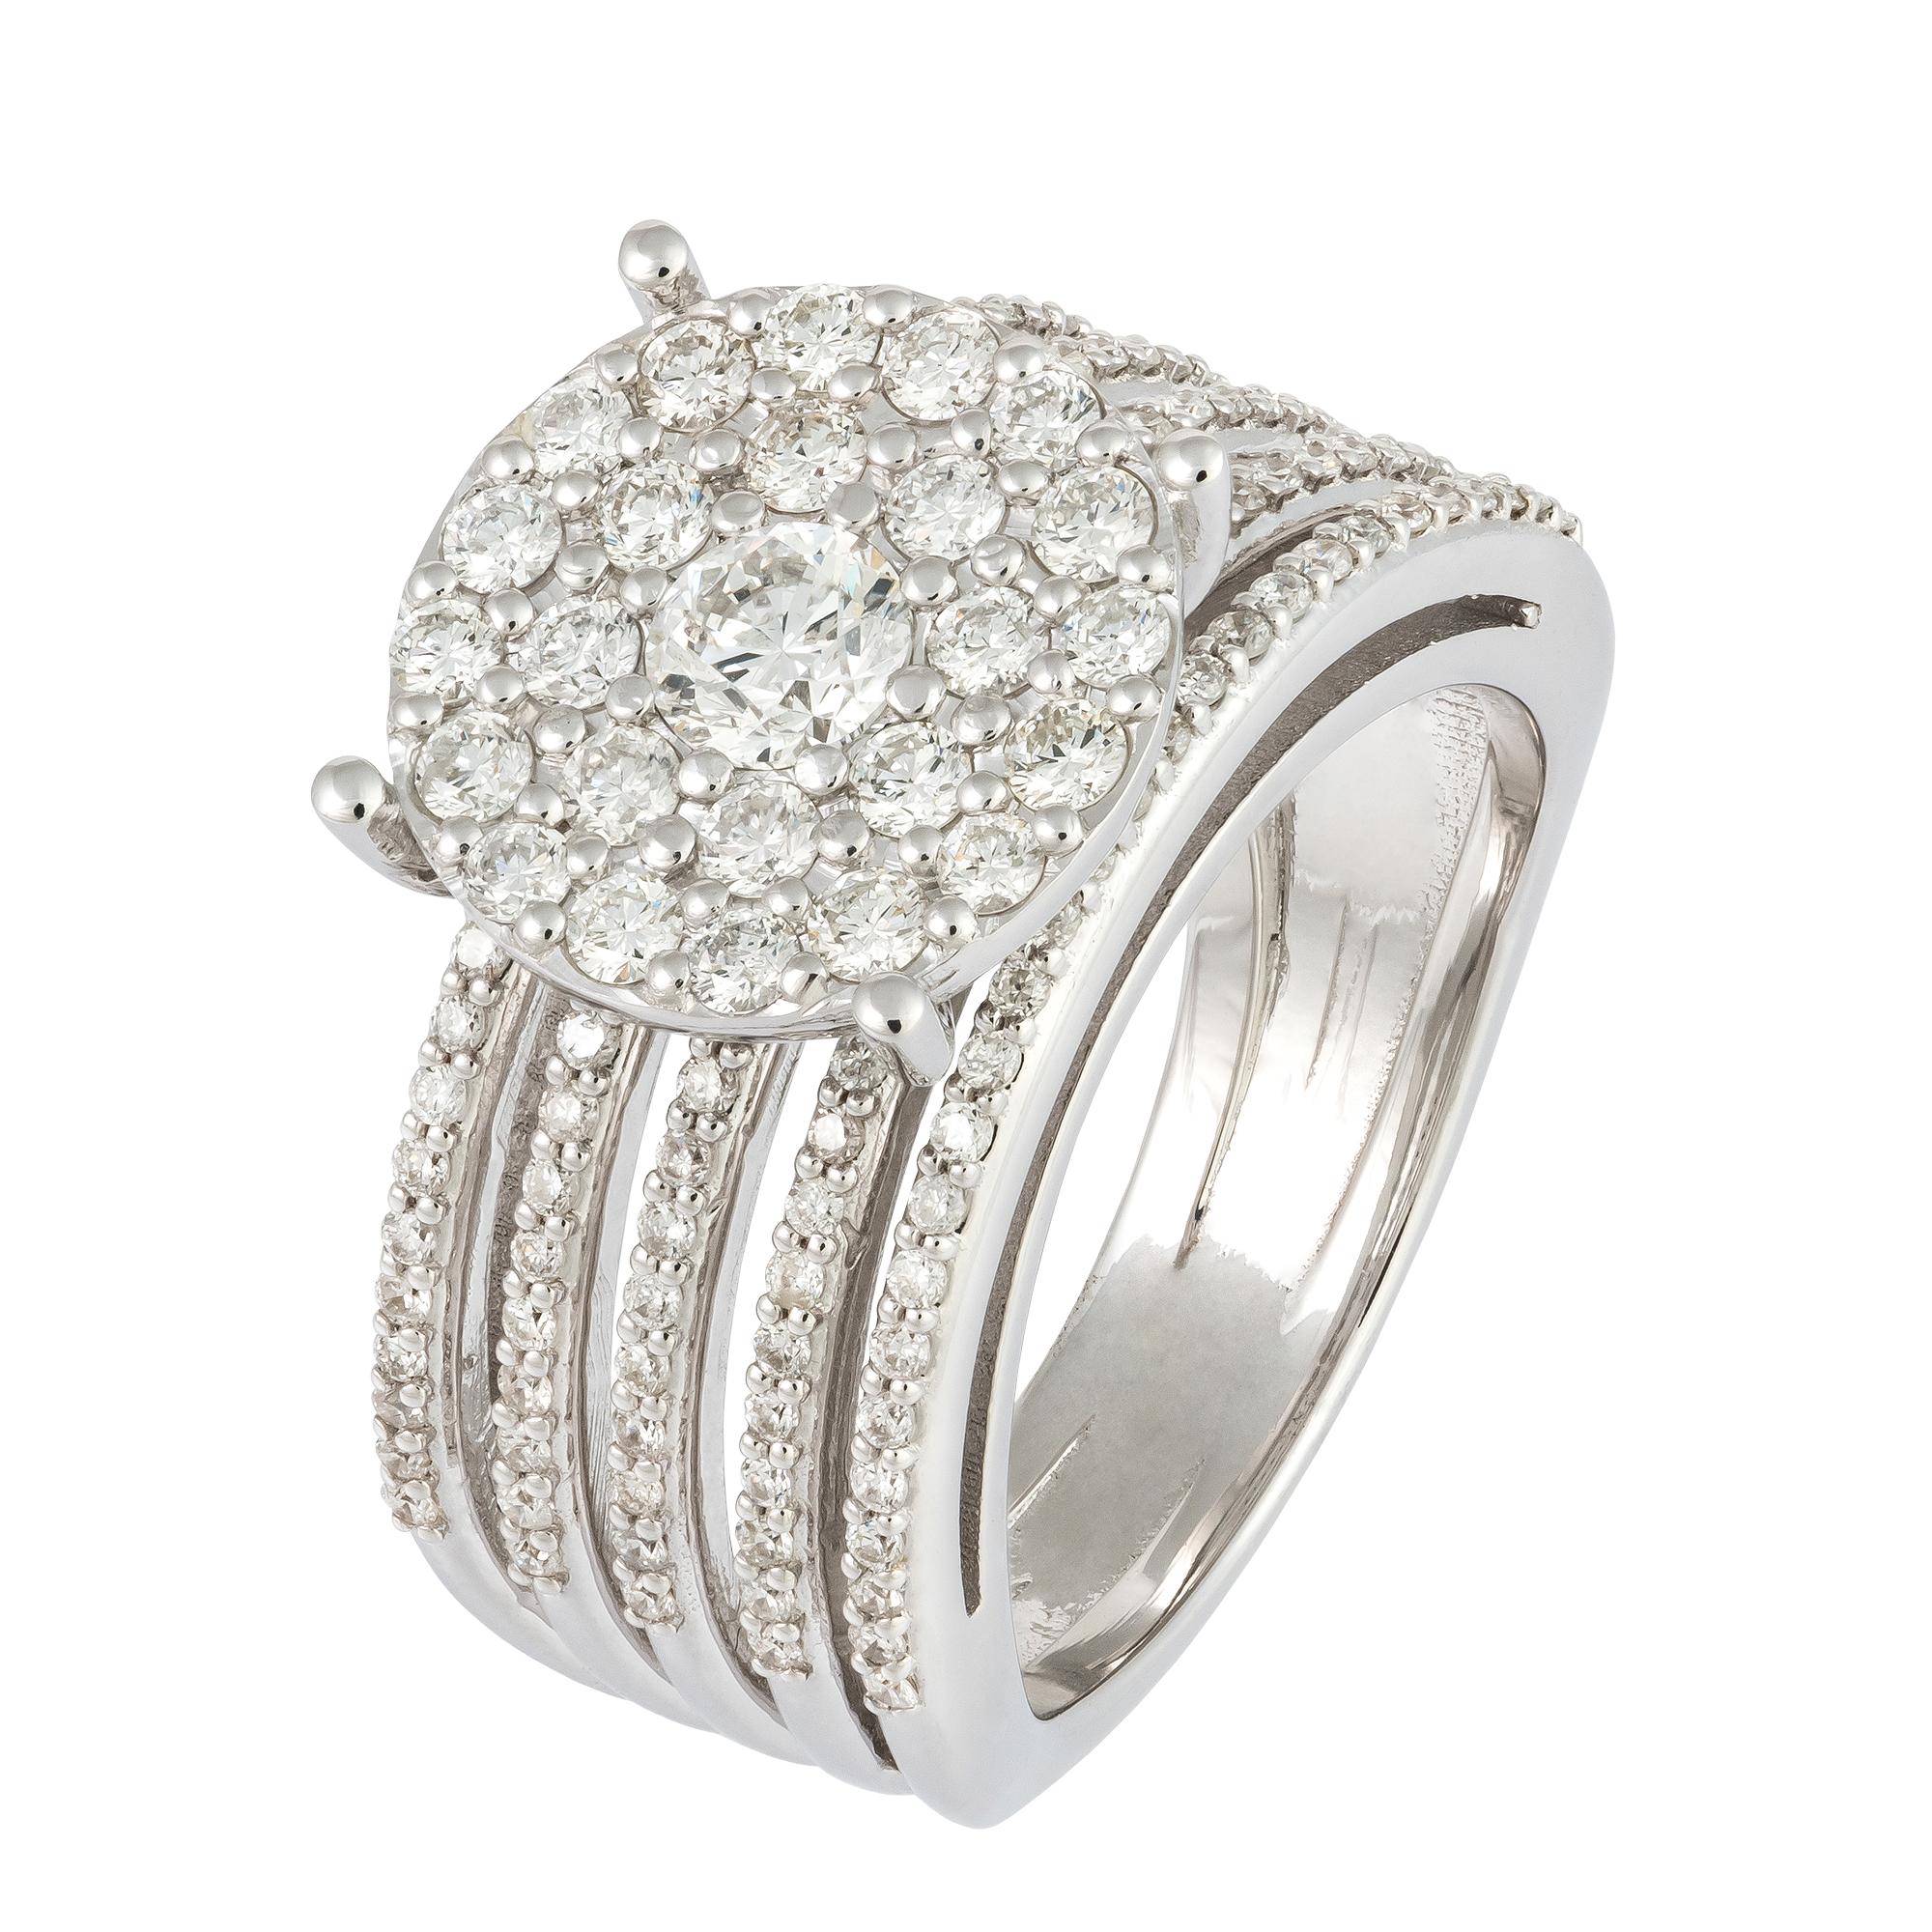 For Sale:  Statement White 18K Gold White Diamond Ring for Her 2